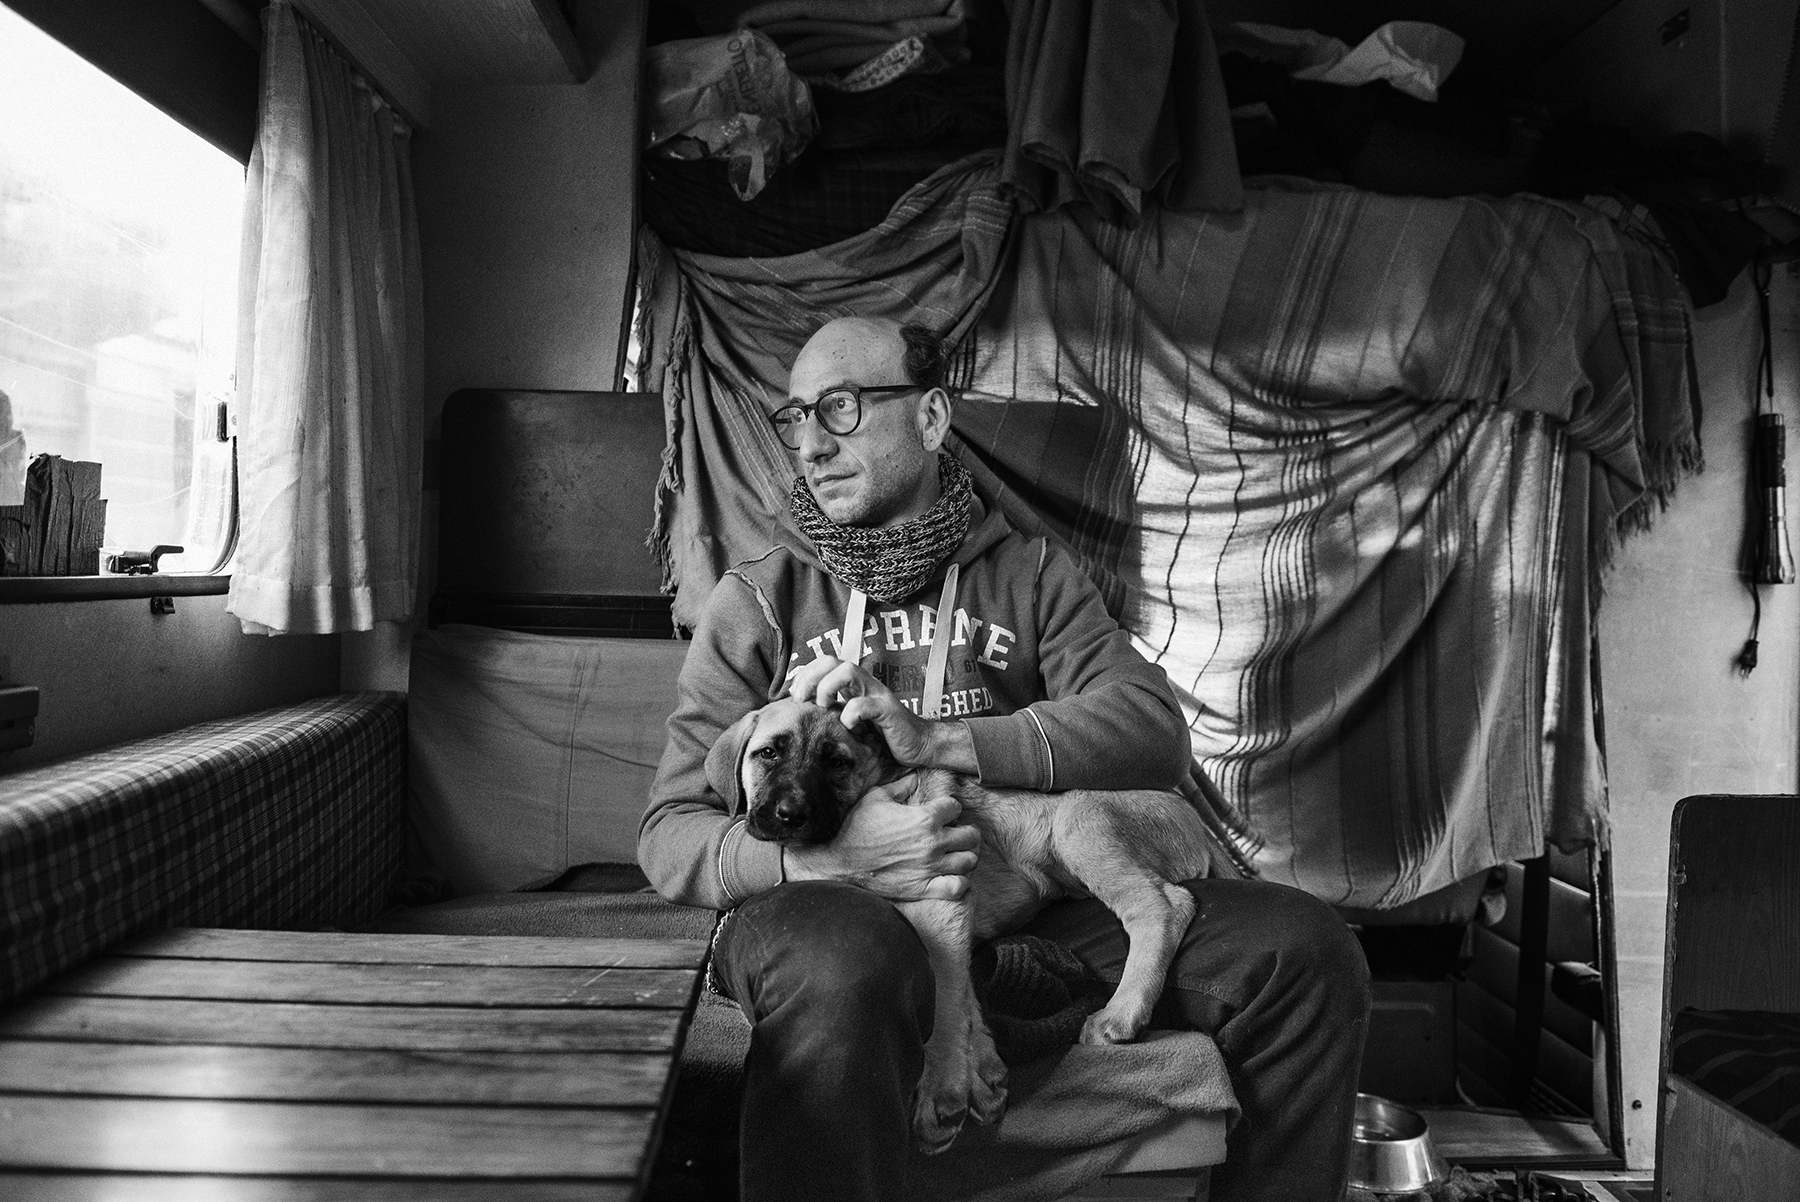  Marcello Fonti (43) look out of the window of the RV he lives in, parked outside the Public Baths of Via Agli� in the working-class district of Barriera di Milano in Turin, Italy; November 2018.
Mr. Fonti has not a home since 2003, moving around Tor